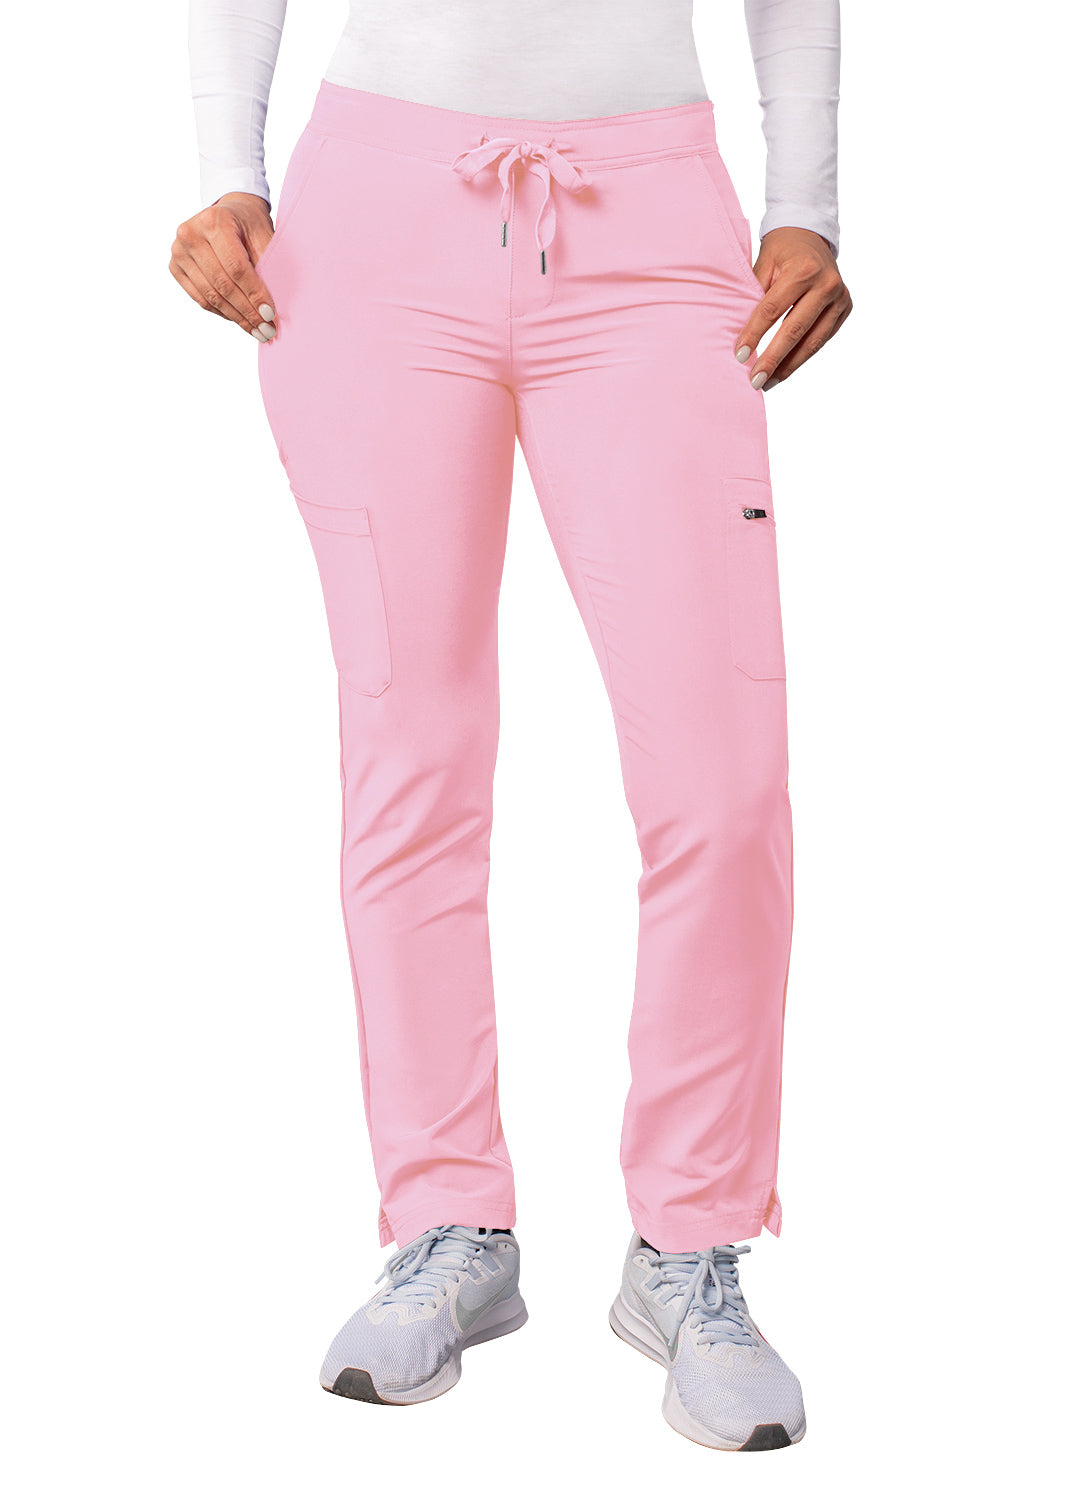 Baby Pink Cargo Pants - Limited